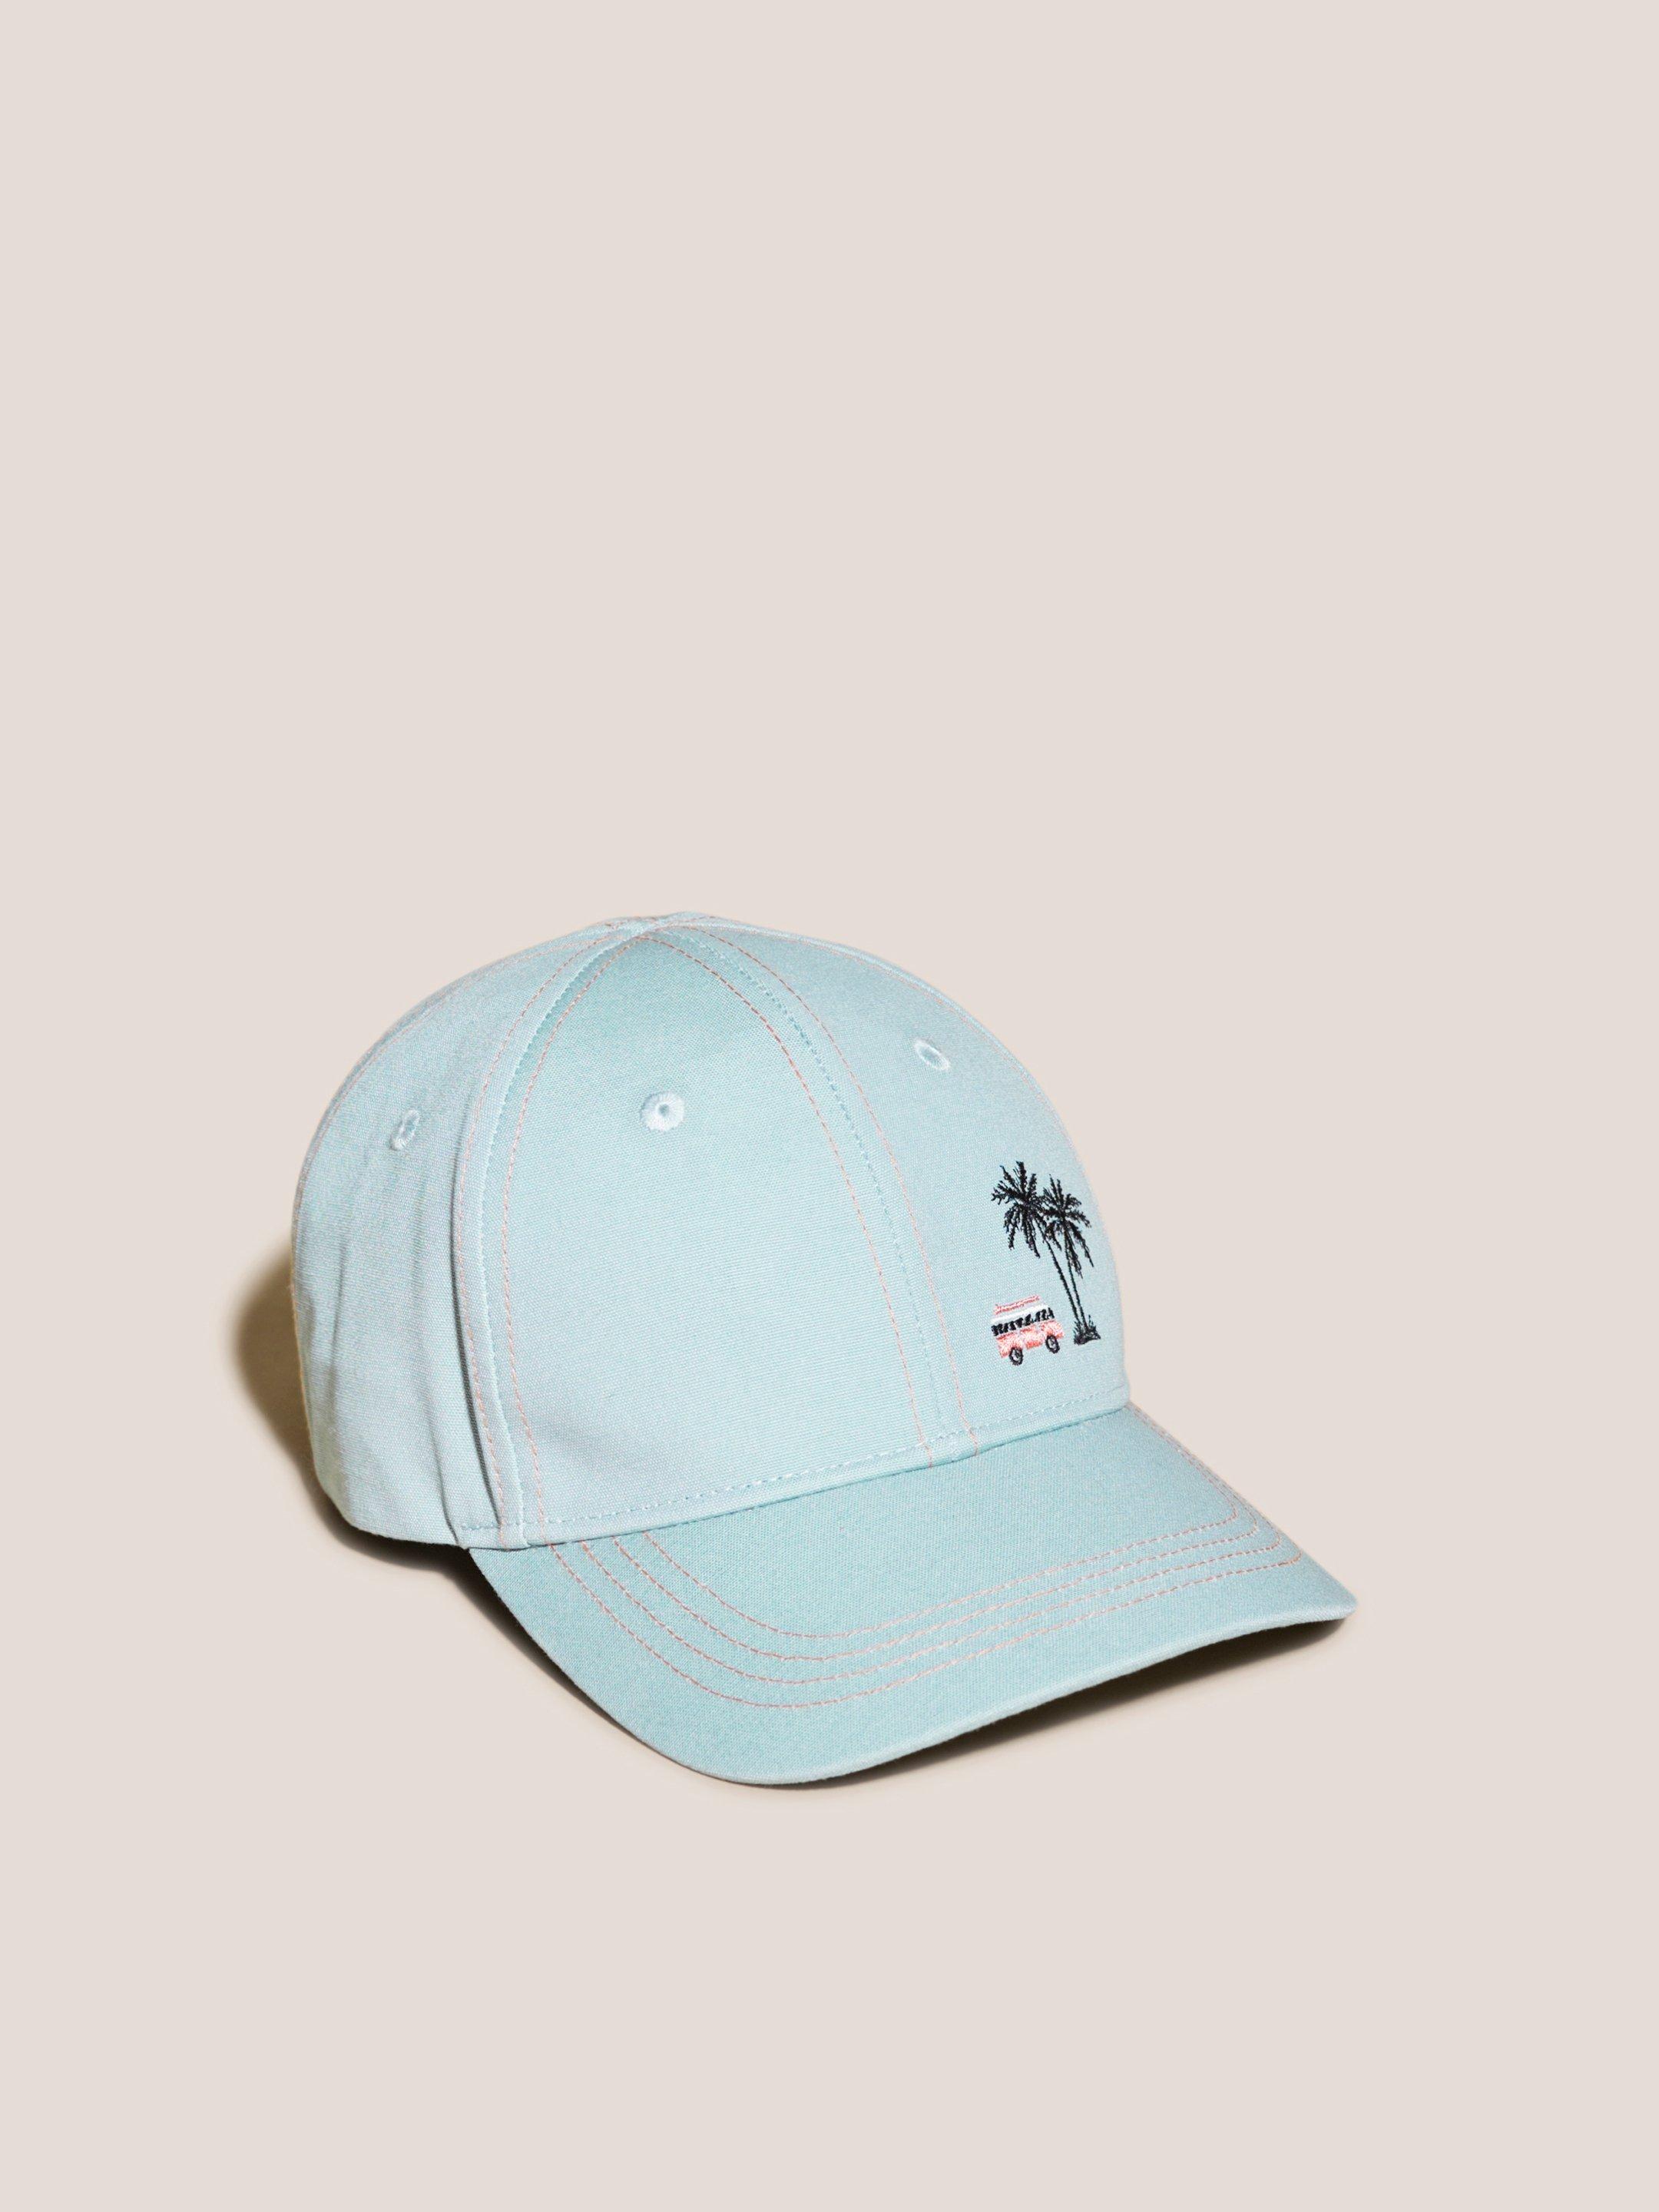 Boys Embroidered Cap